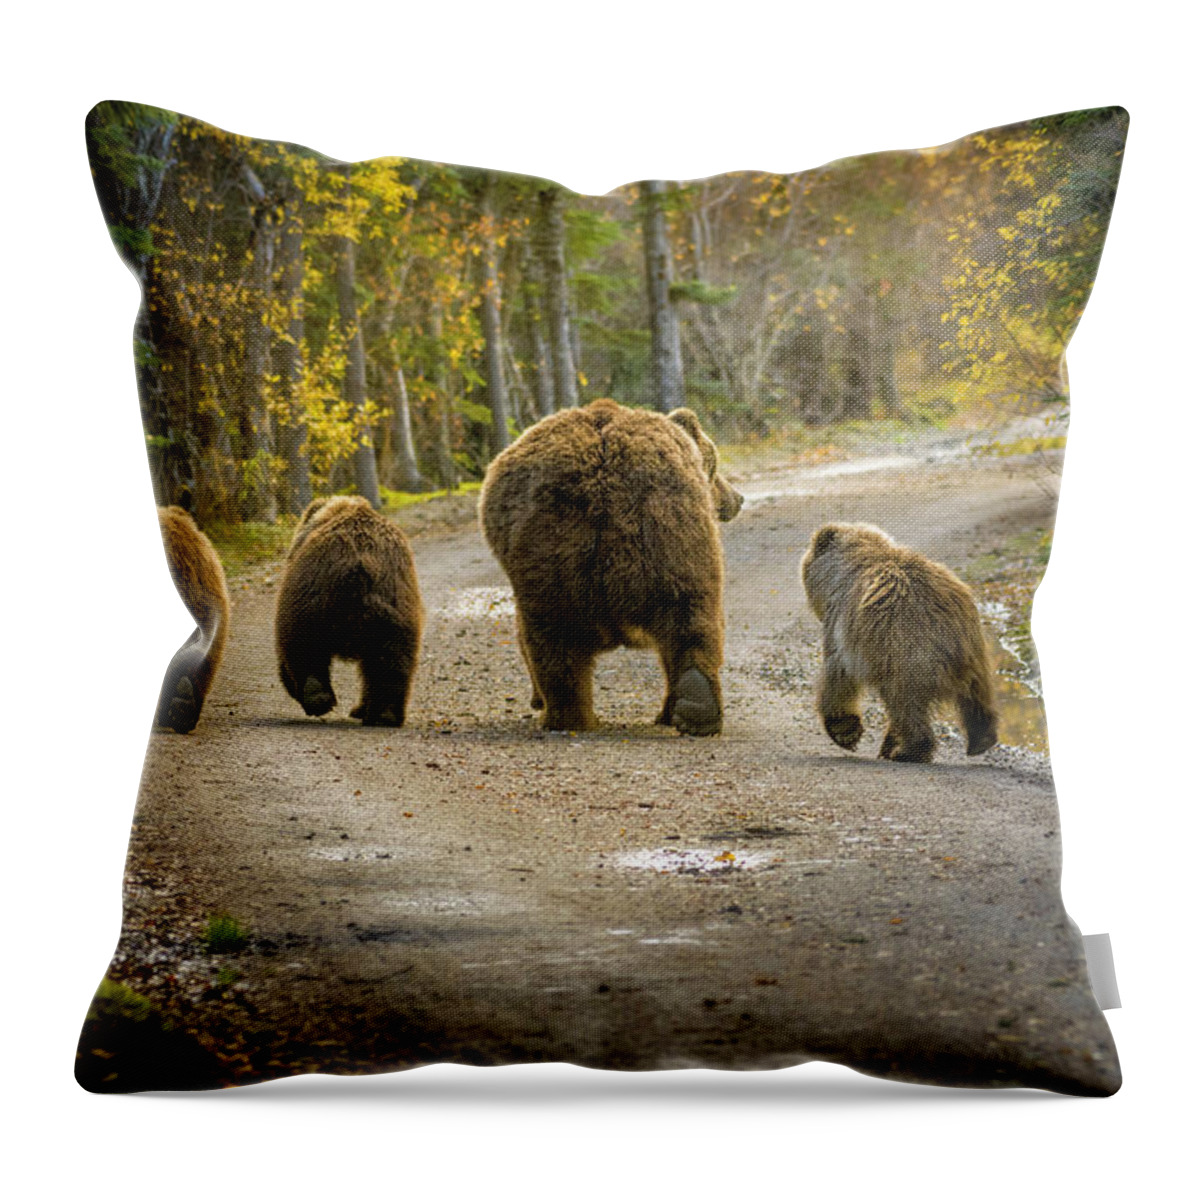 #faatoppicks Throw Pillow featuring the photograph Bear Bums by Chad Dutson